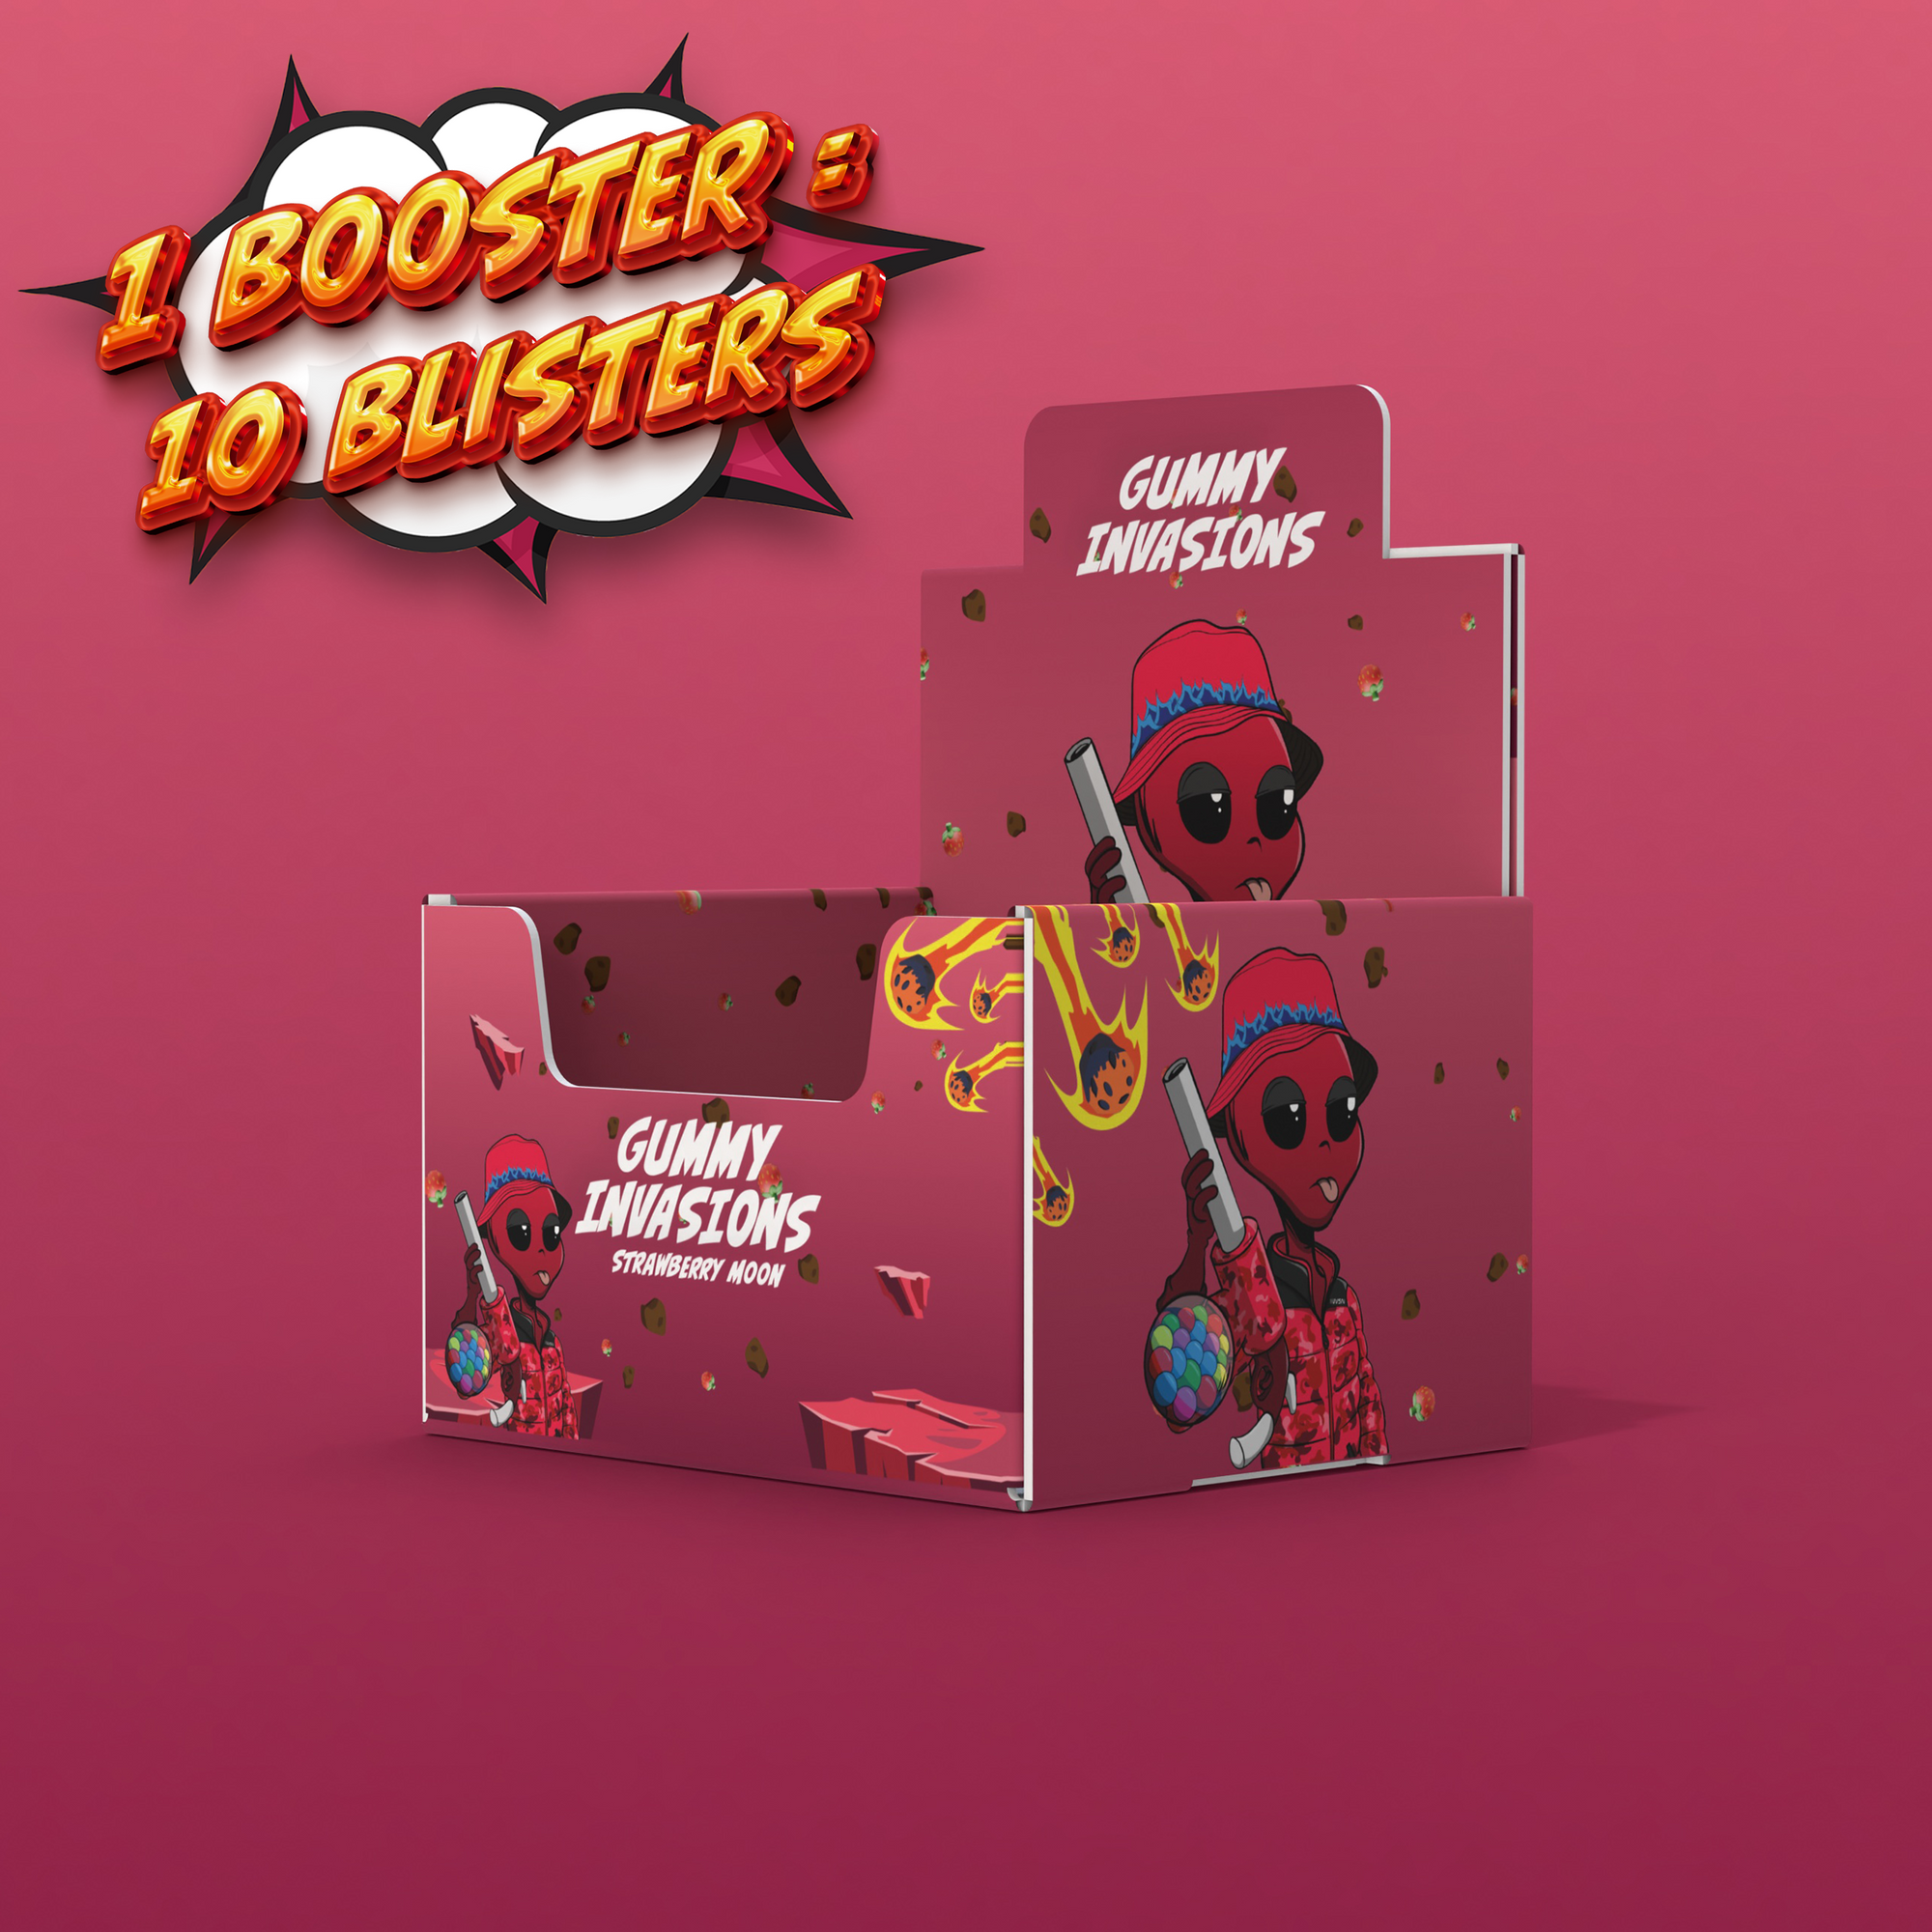 Strawberry Moon - 1 Booster (10 Blisters)